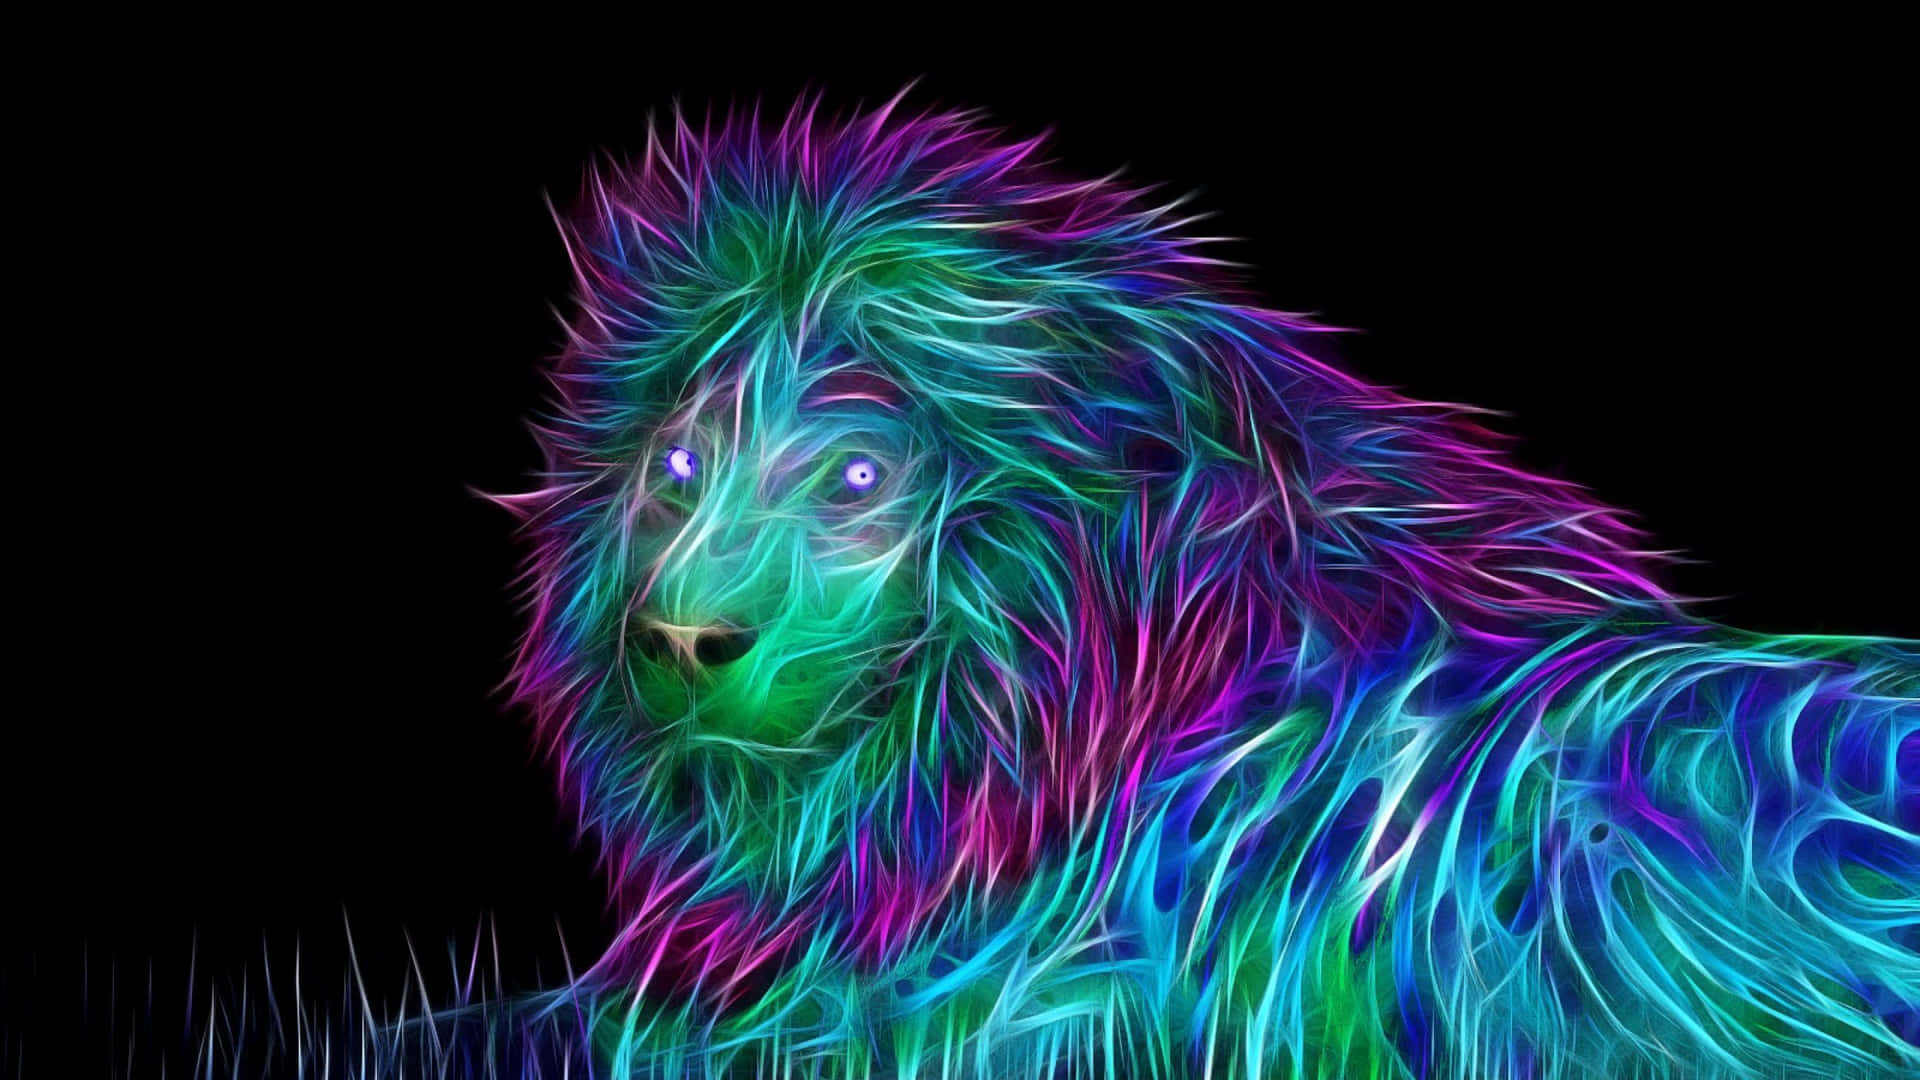 Free Neon Animals Wallpaper Downloads, [100+] Neon Animals Wallpapers for  FREE 